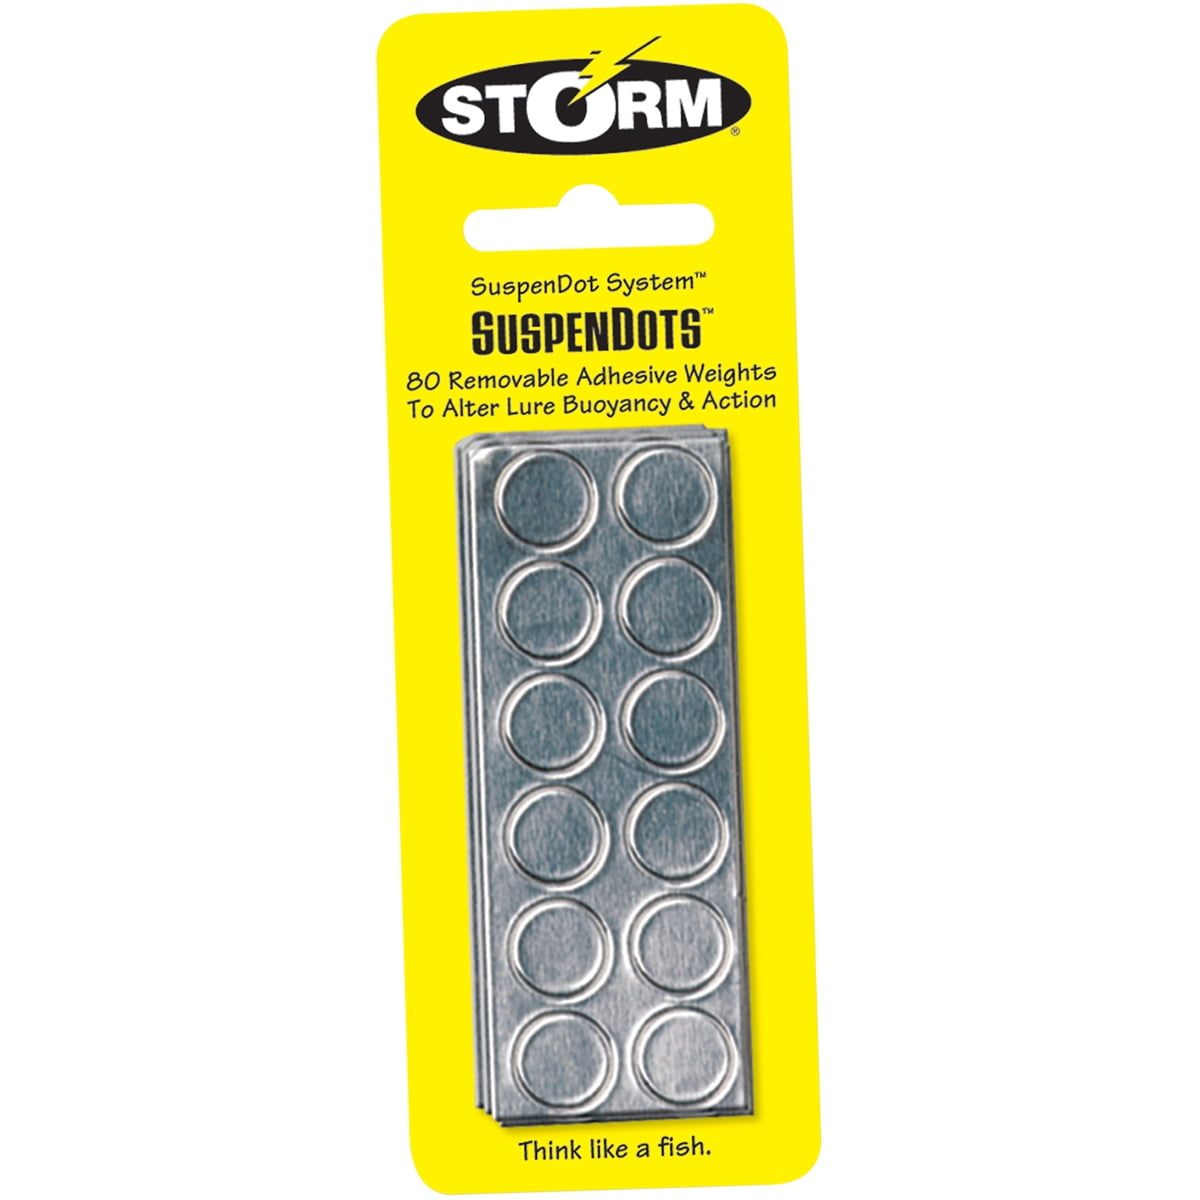 Storm SuspenDots Removable Adhesive Weights - 80 Count 